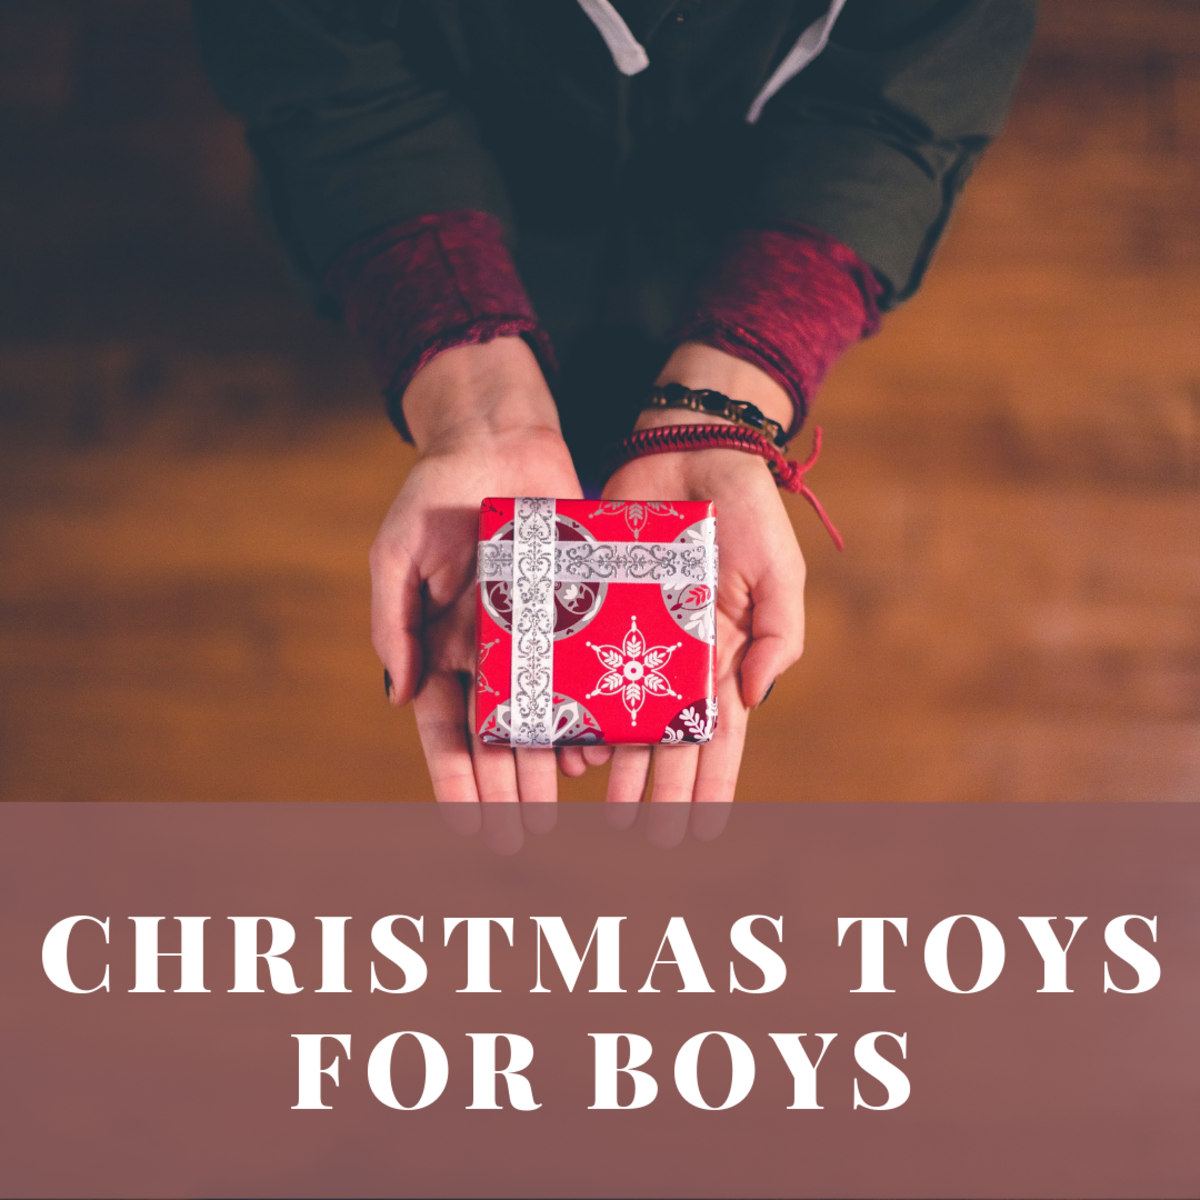 These toys are perfect for young boys everywhere!